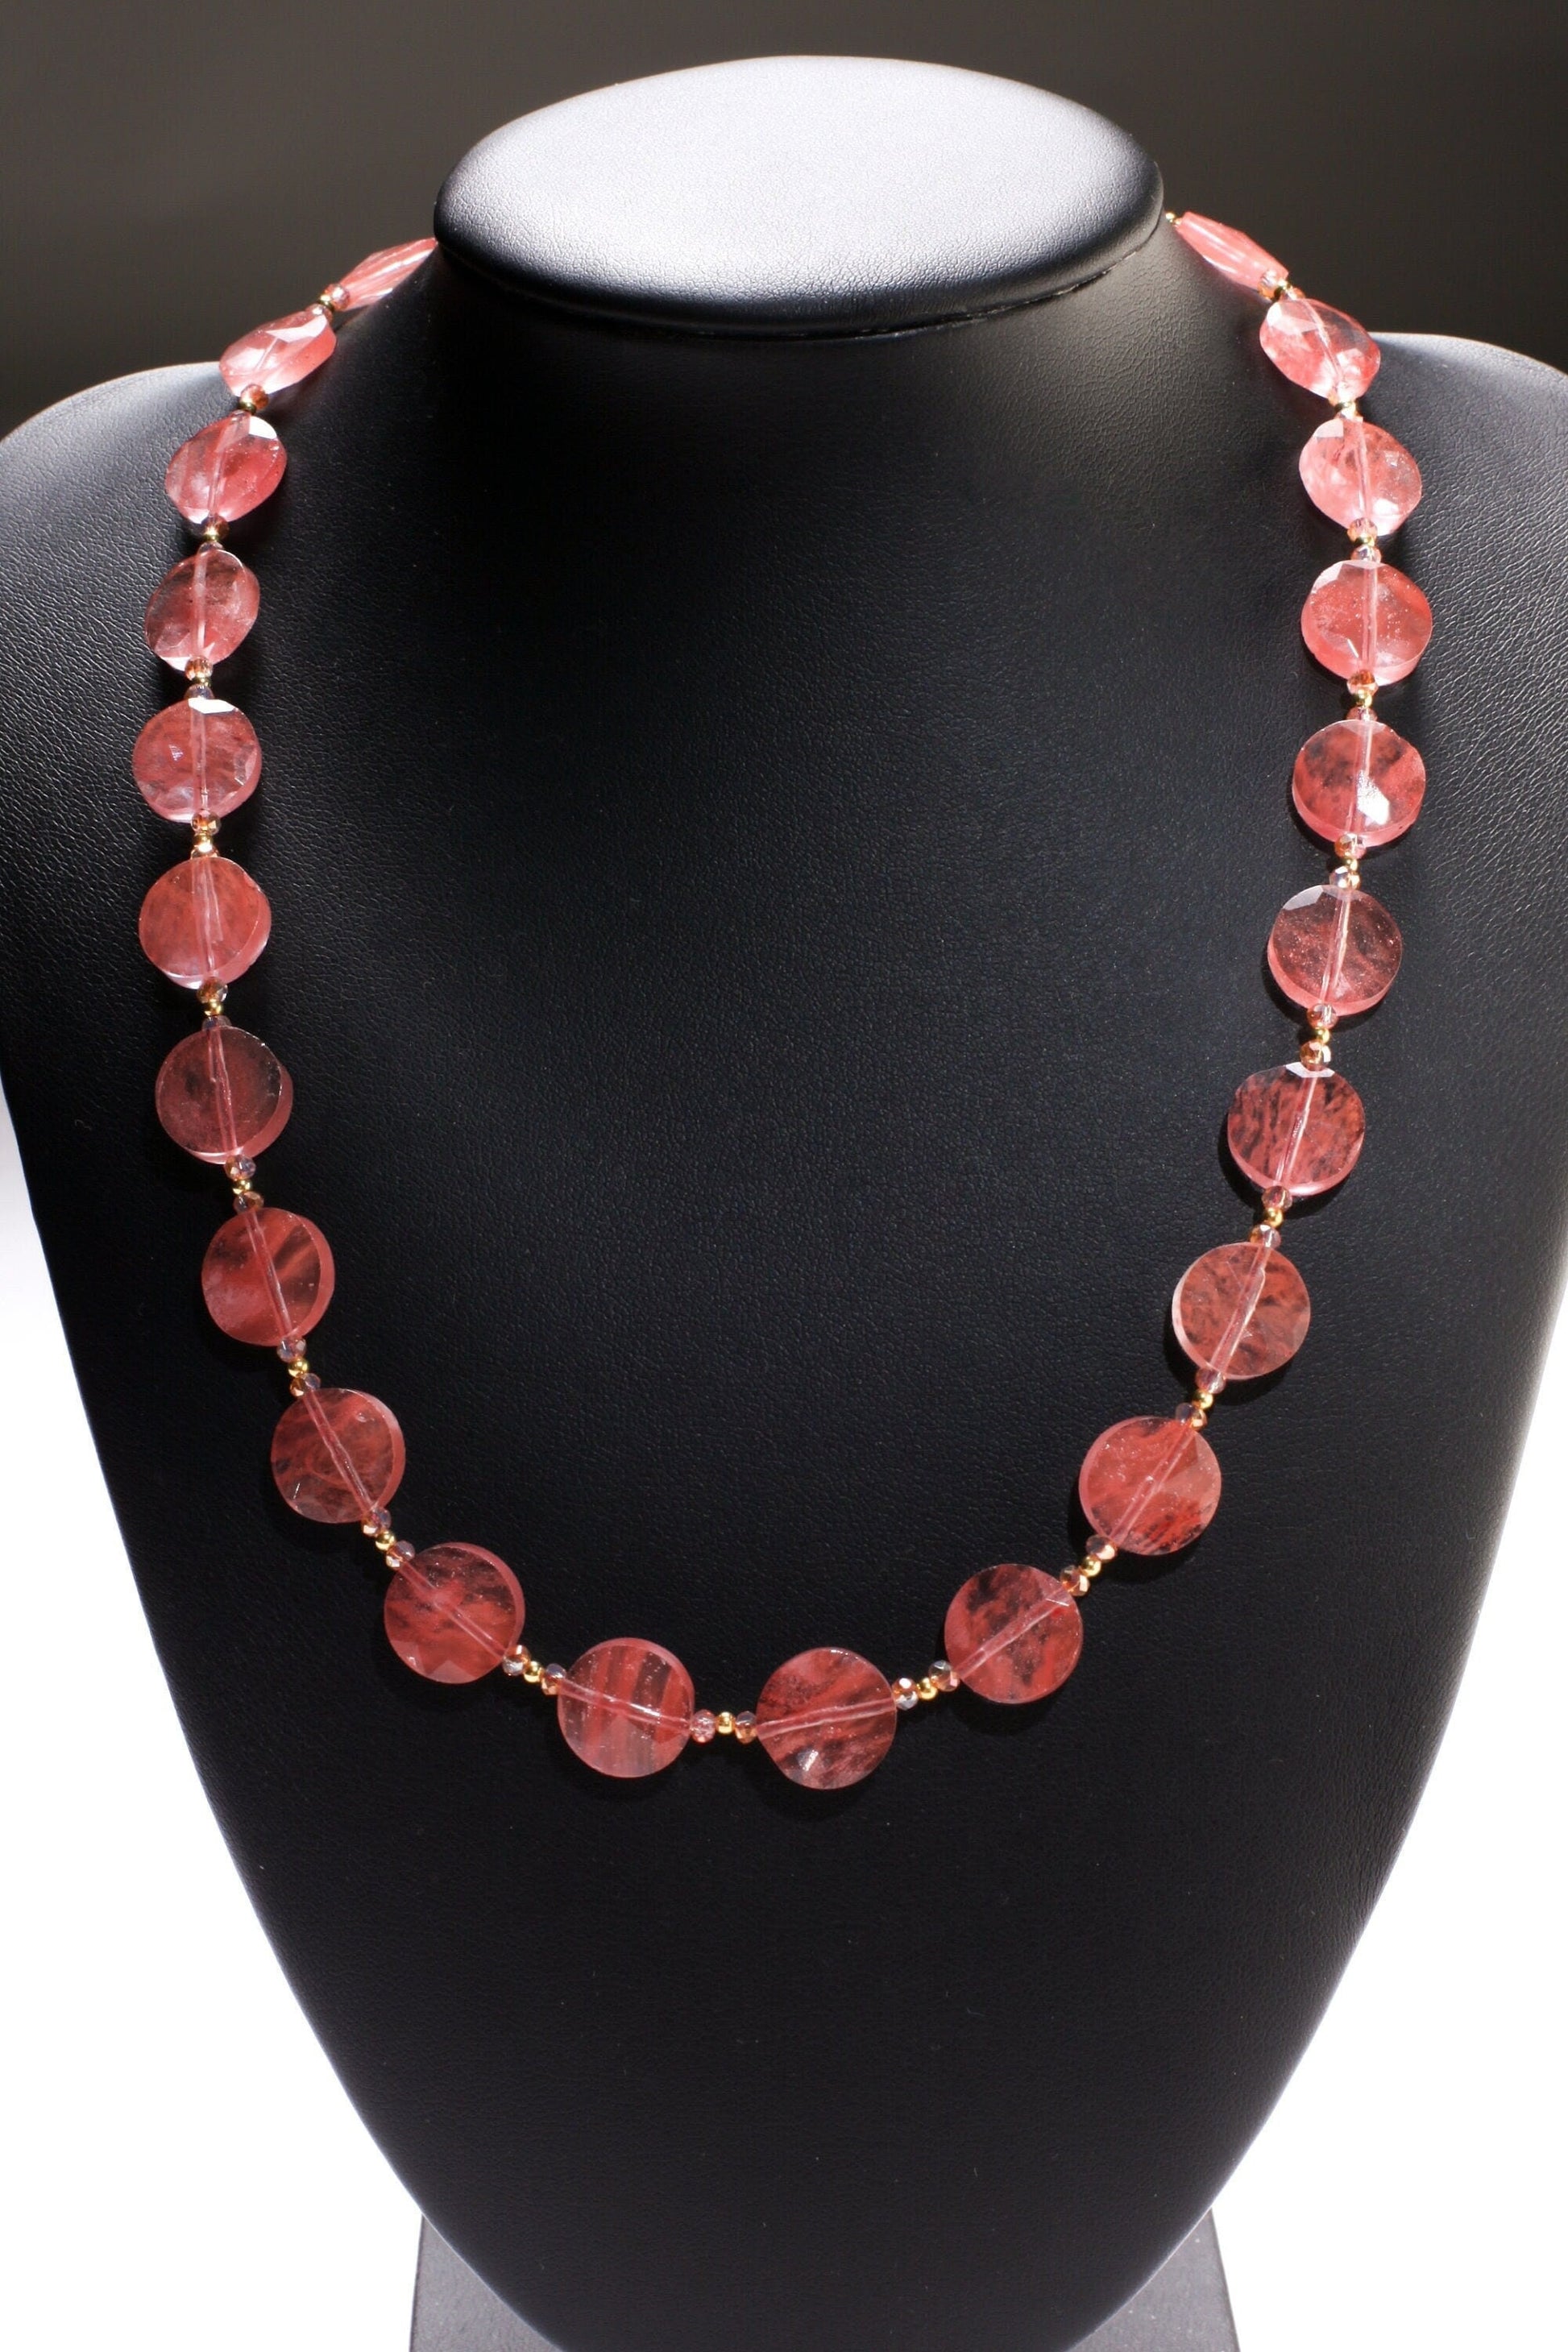 Watermelon Quartz Faceted 12mm Coin Shape in Strawberry Quartz 18.5&quot; Gold Necklace with 1.5&quot; Extension, Beautiful Summer Collection